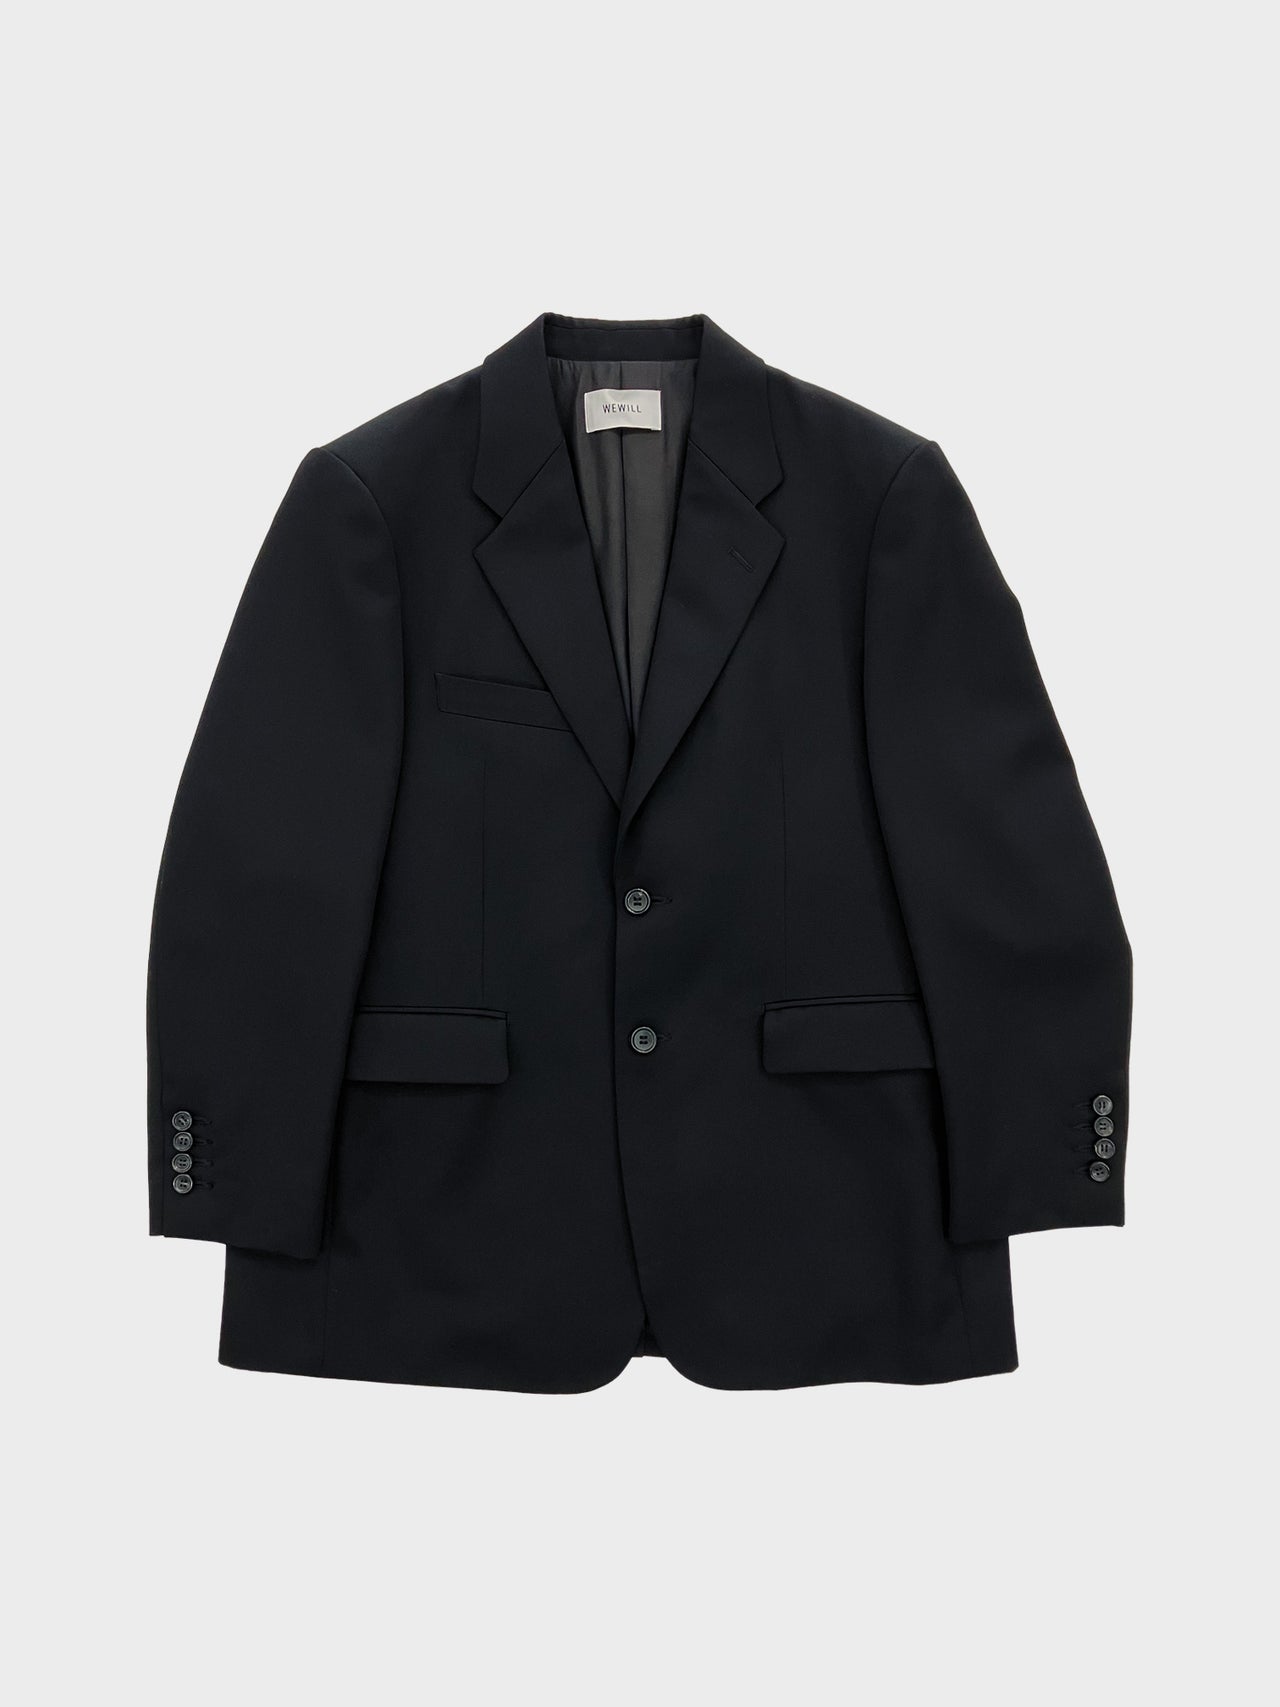 WEWILL /  TAILORED SQUARE JACKET (BLACK)